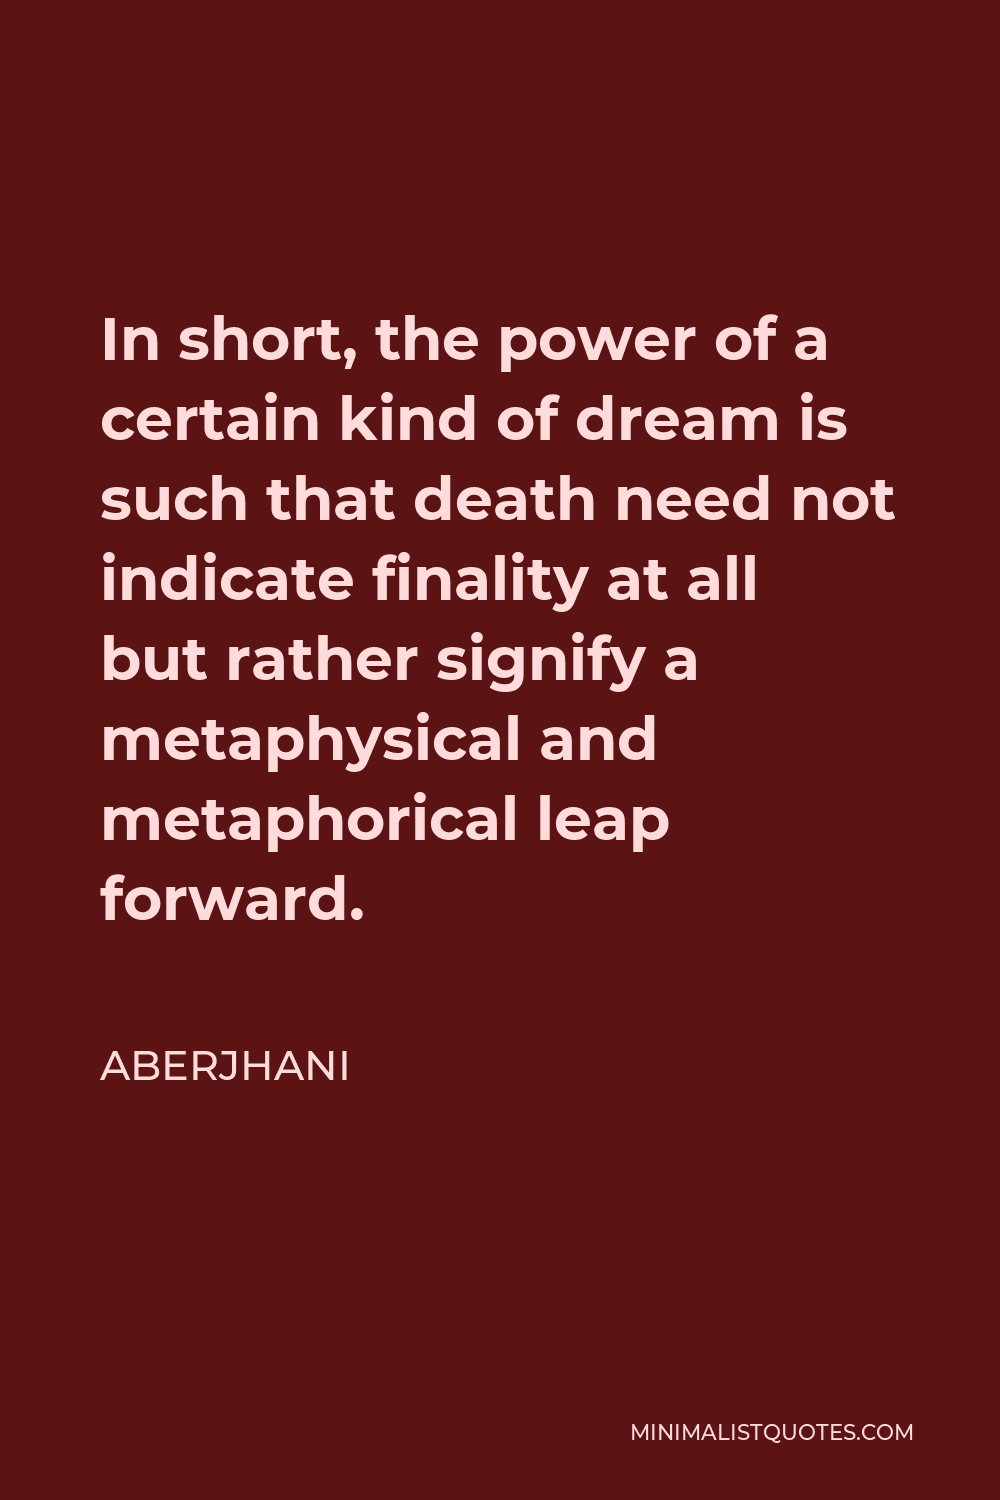 Aberjhani Quote - In short, the power of a certain kind of dream is such that death need not indicate finality at all but rather signify a metaphysical and metaphorical leap forward.